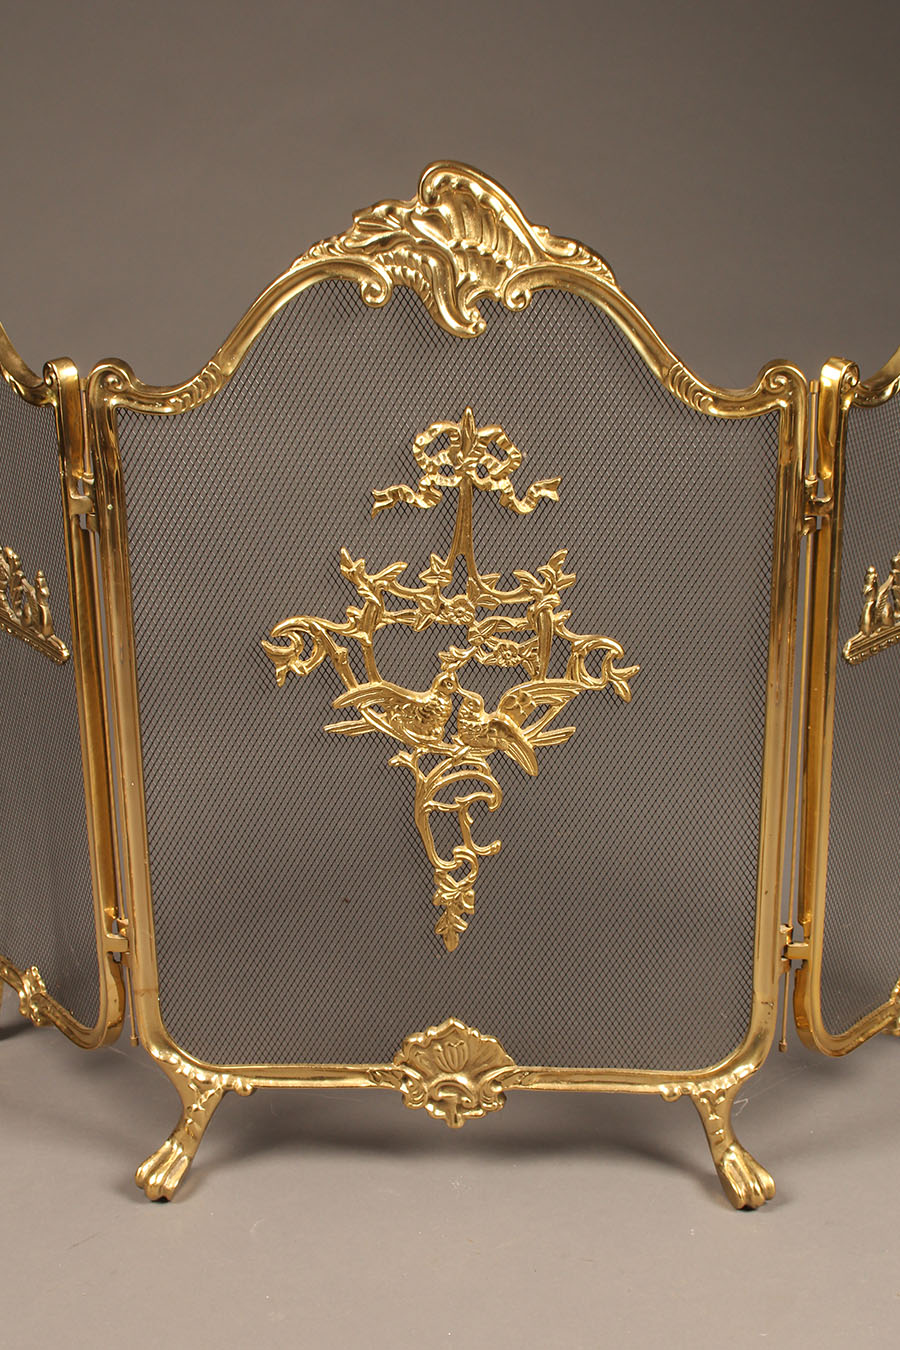 Antiqued Brass Fireplace Screen Luxury solid Brass Folding Fireplace Screen